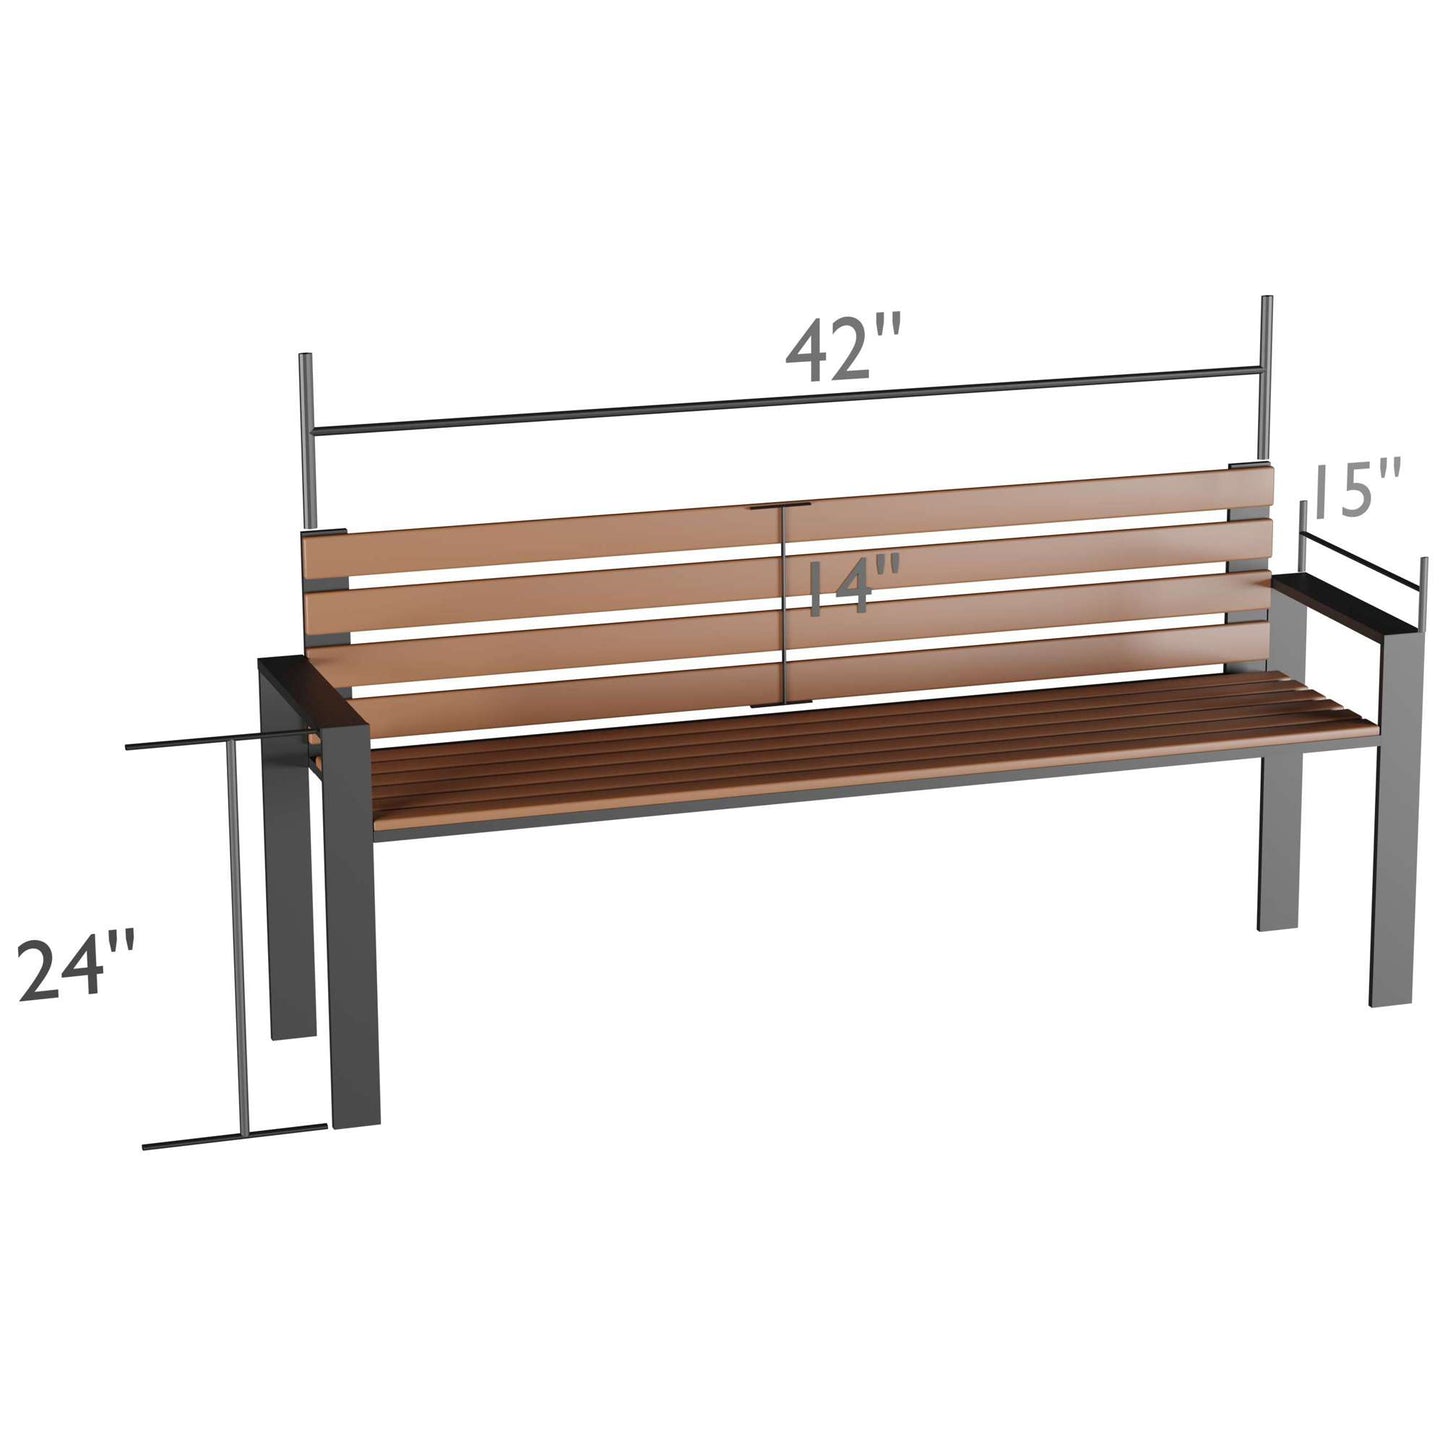 Steel And Wooden Outdoor Furniture Garden Bench (Square Shaped)